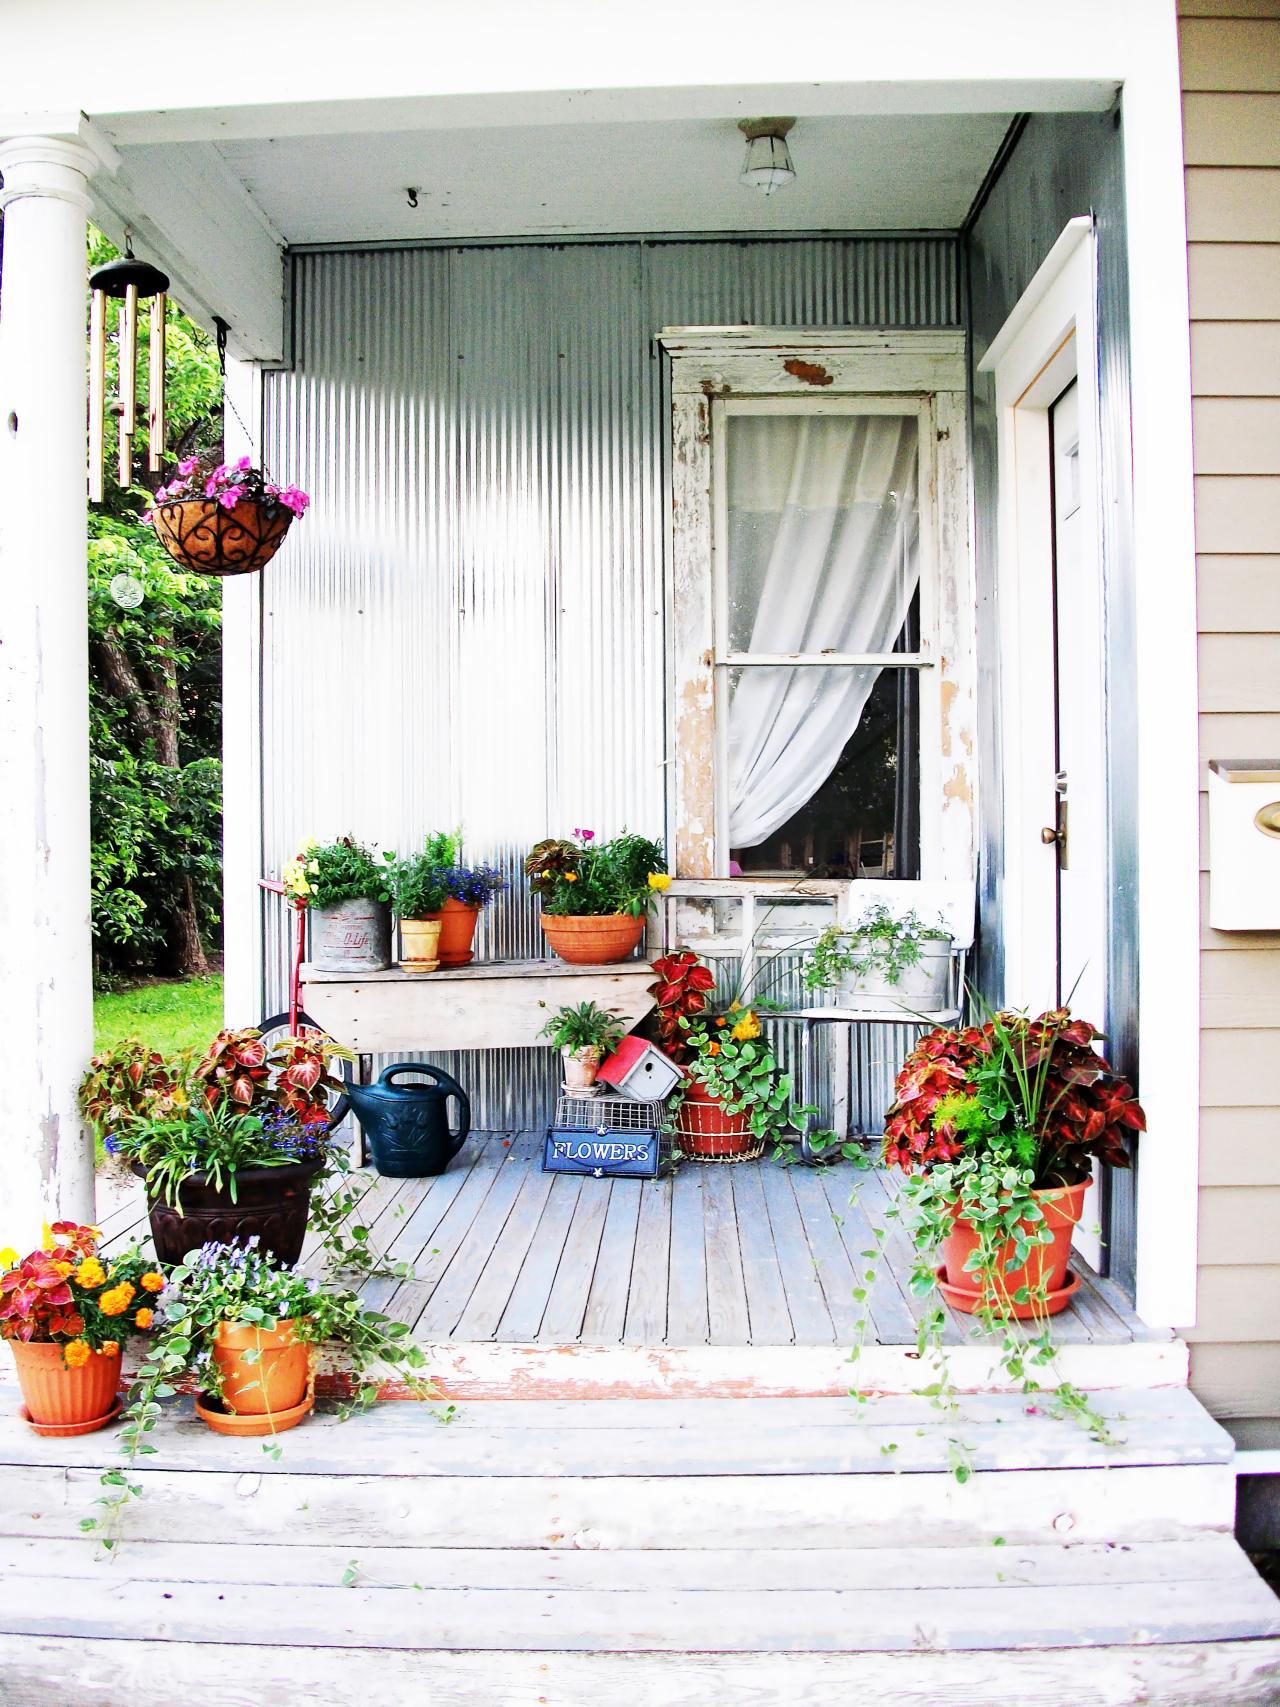 Garden & Landscaping Shabby Chic Country Porch Container Gardens ...